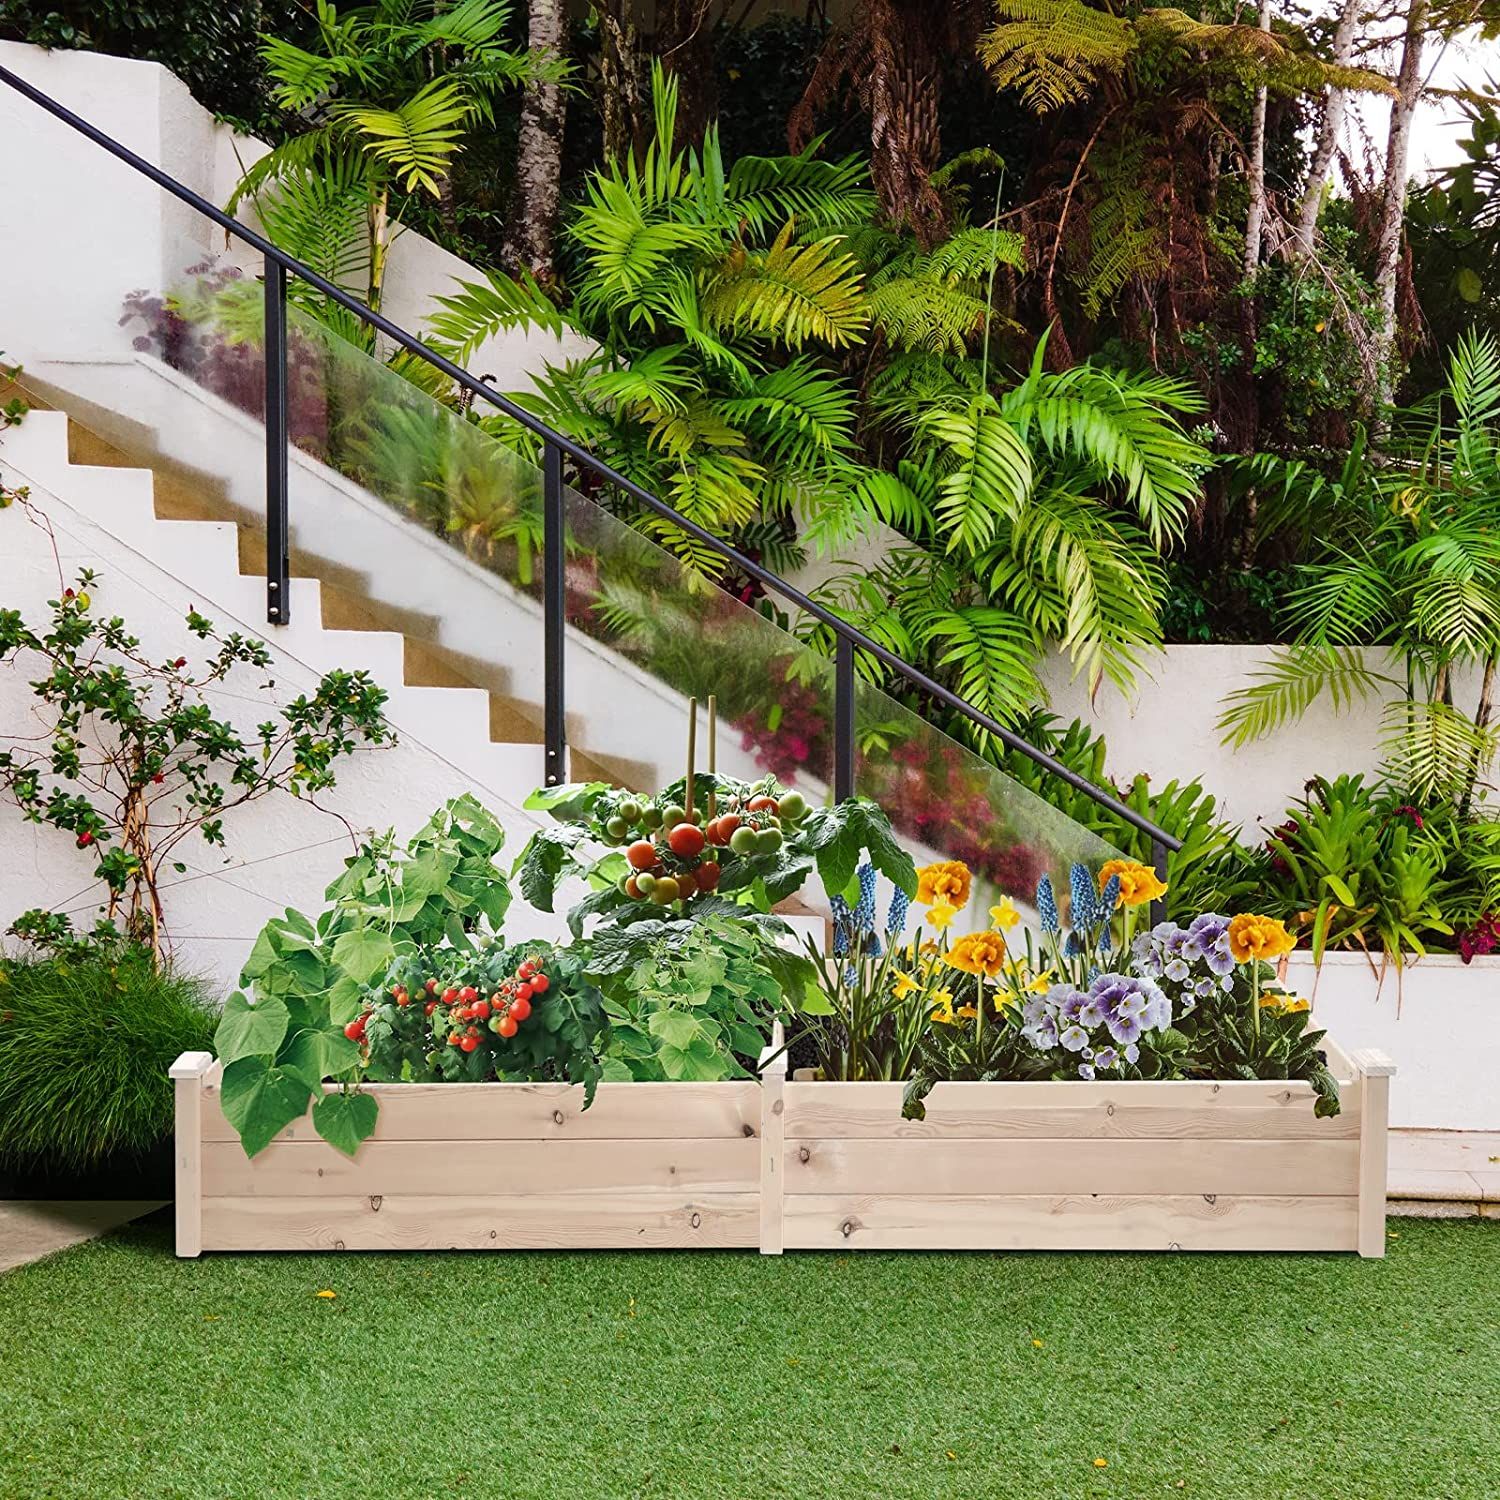 Why You Should Invest in a Raised Garden Bed This Spring